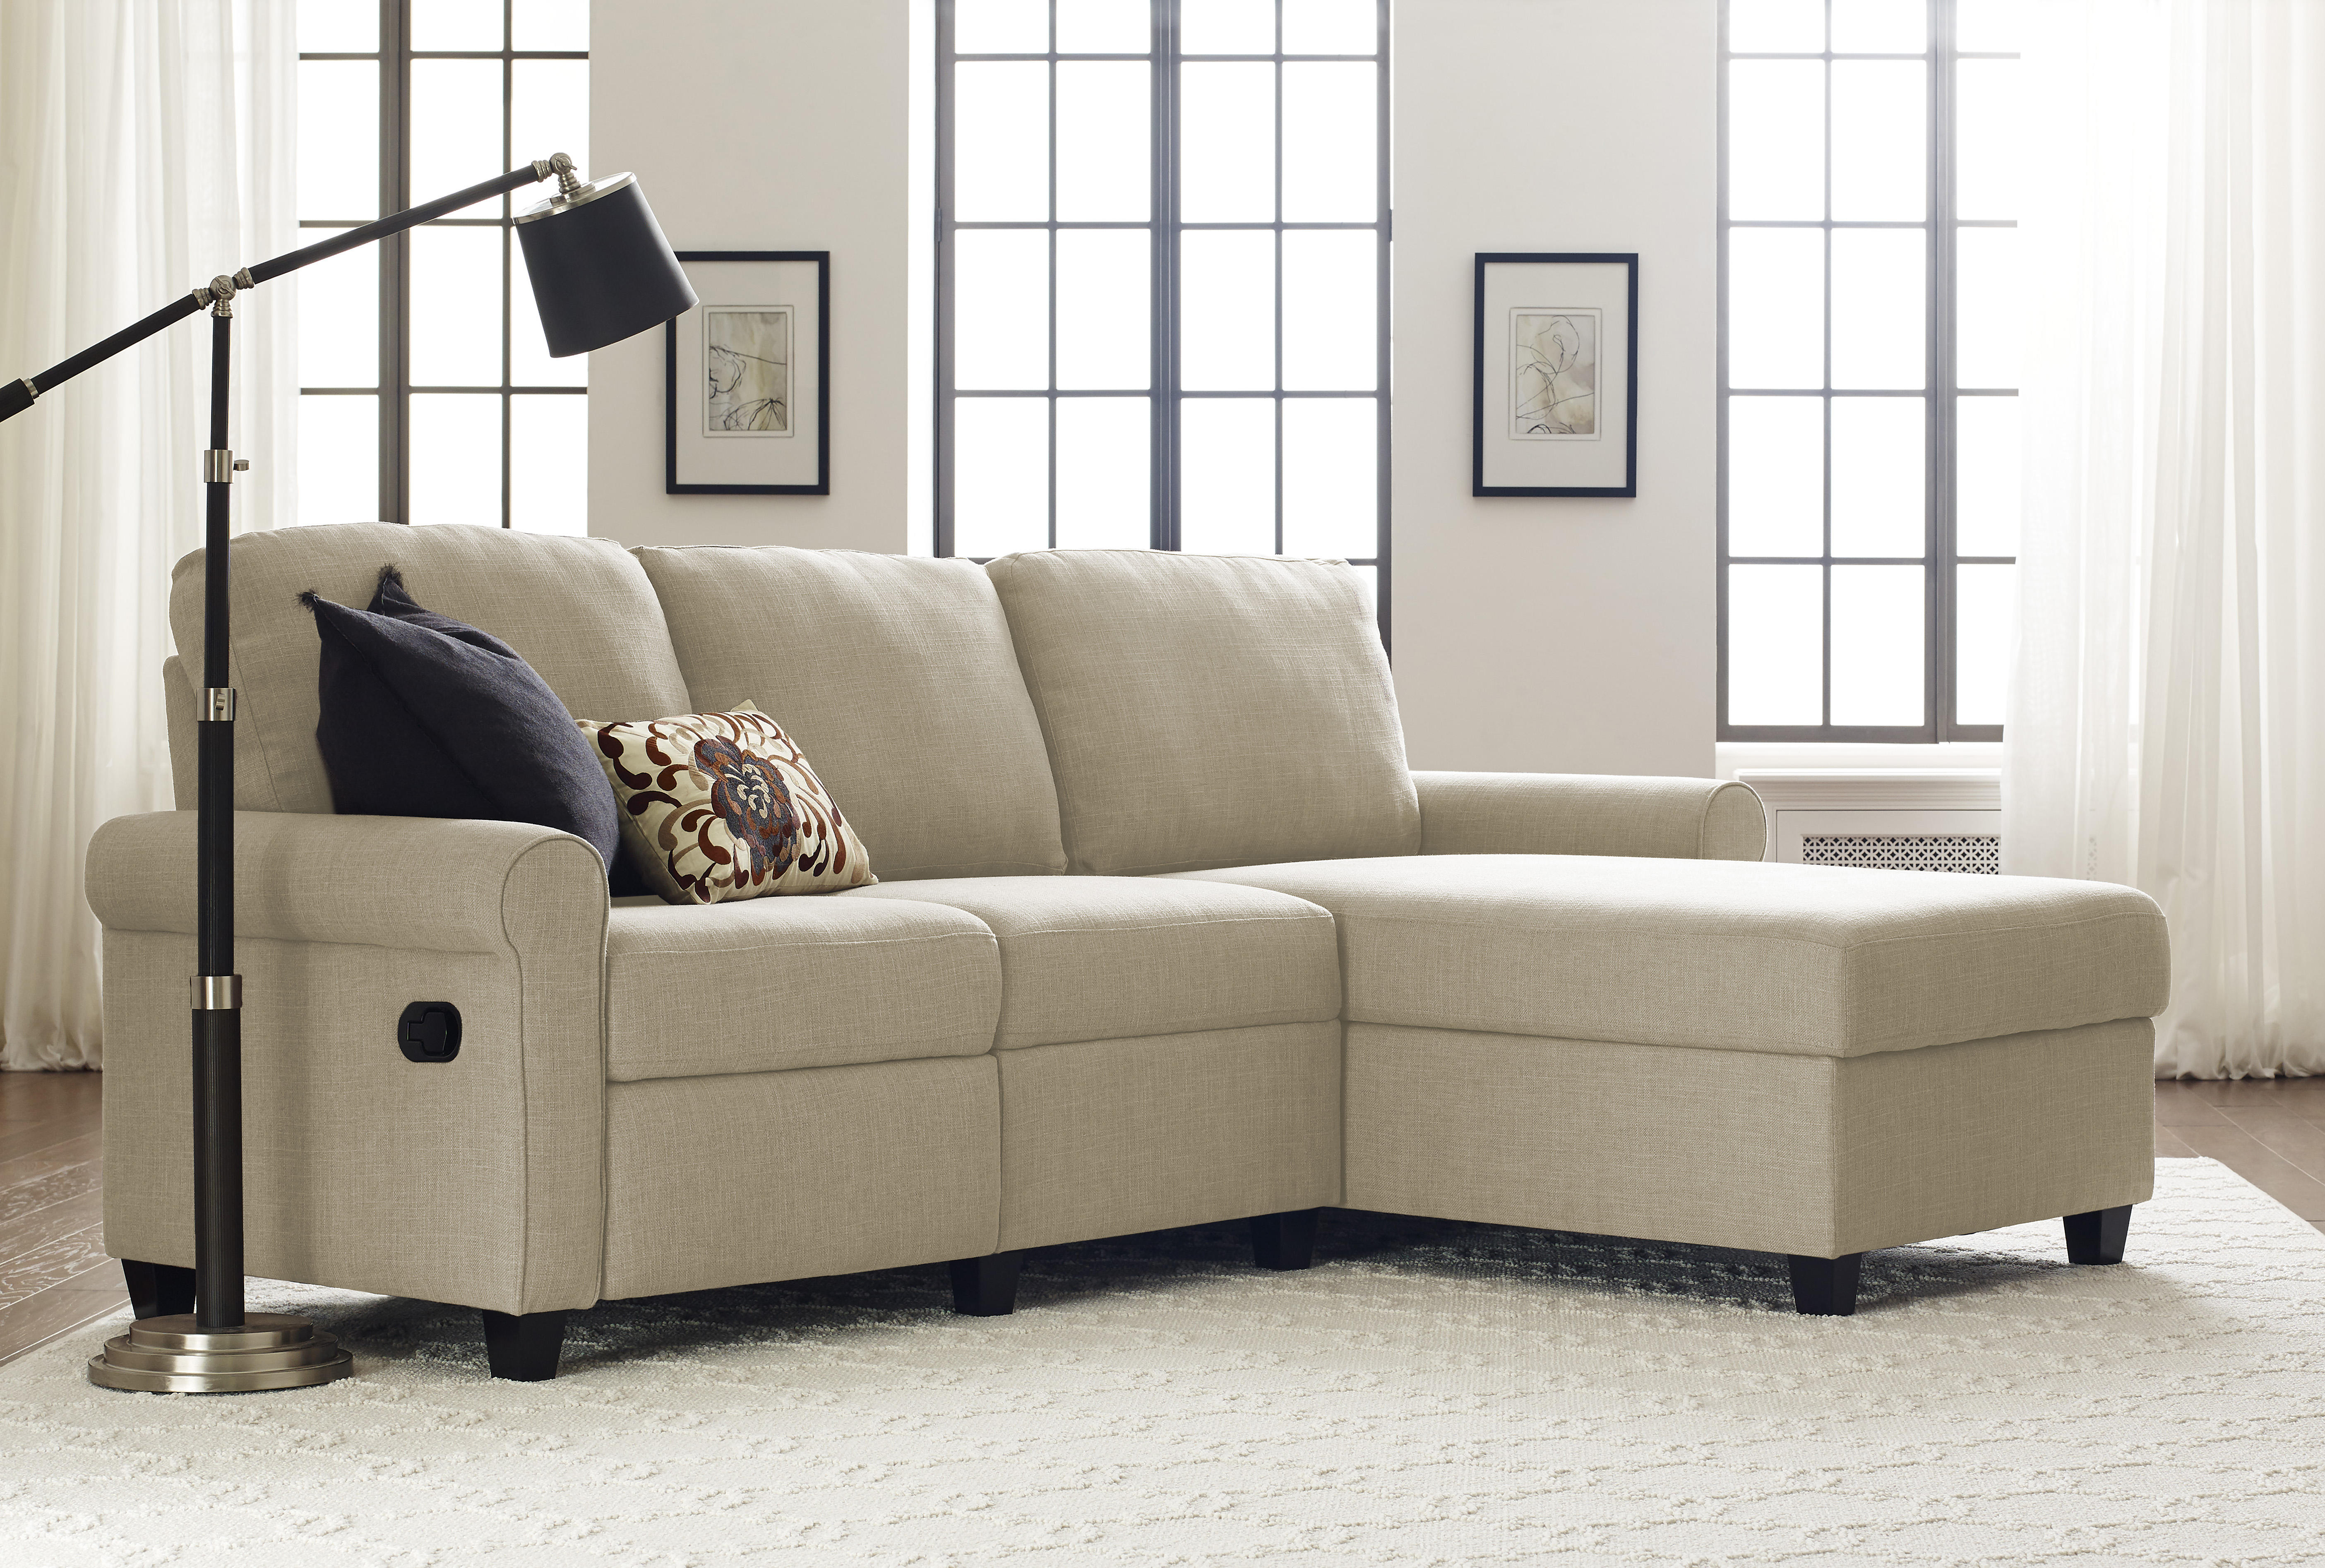 Serta Copenhagen Reclining Sectional with Right Storage Chaise - Oatmeal - image 3 of 9